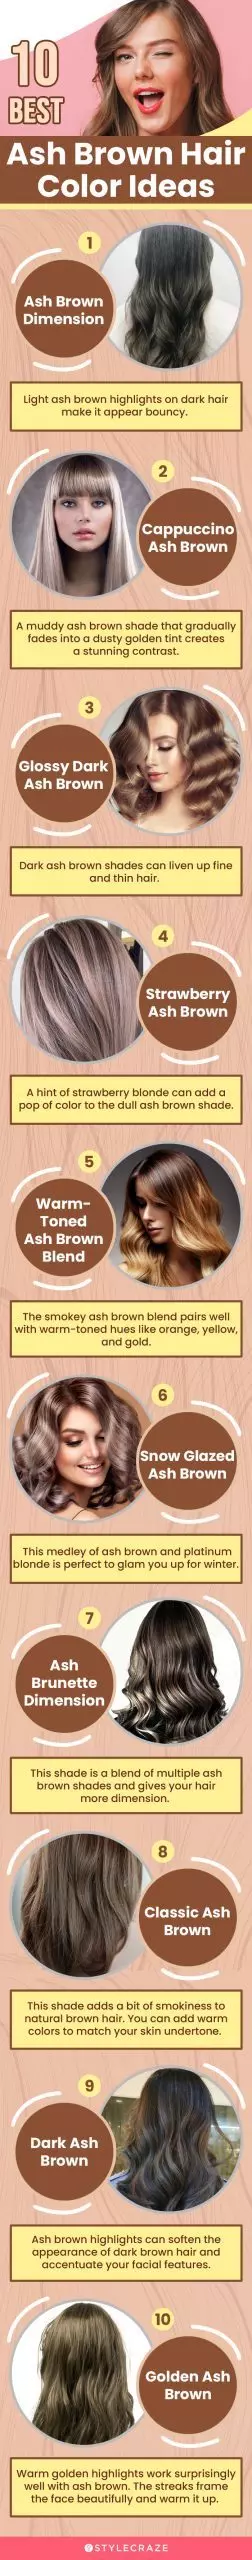 10 best ash brown hair color ideas (infographic)